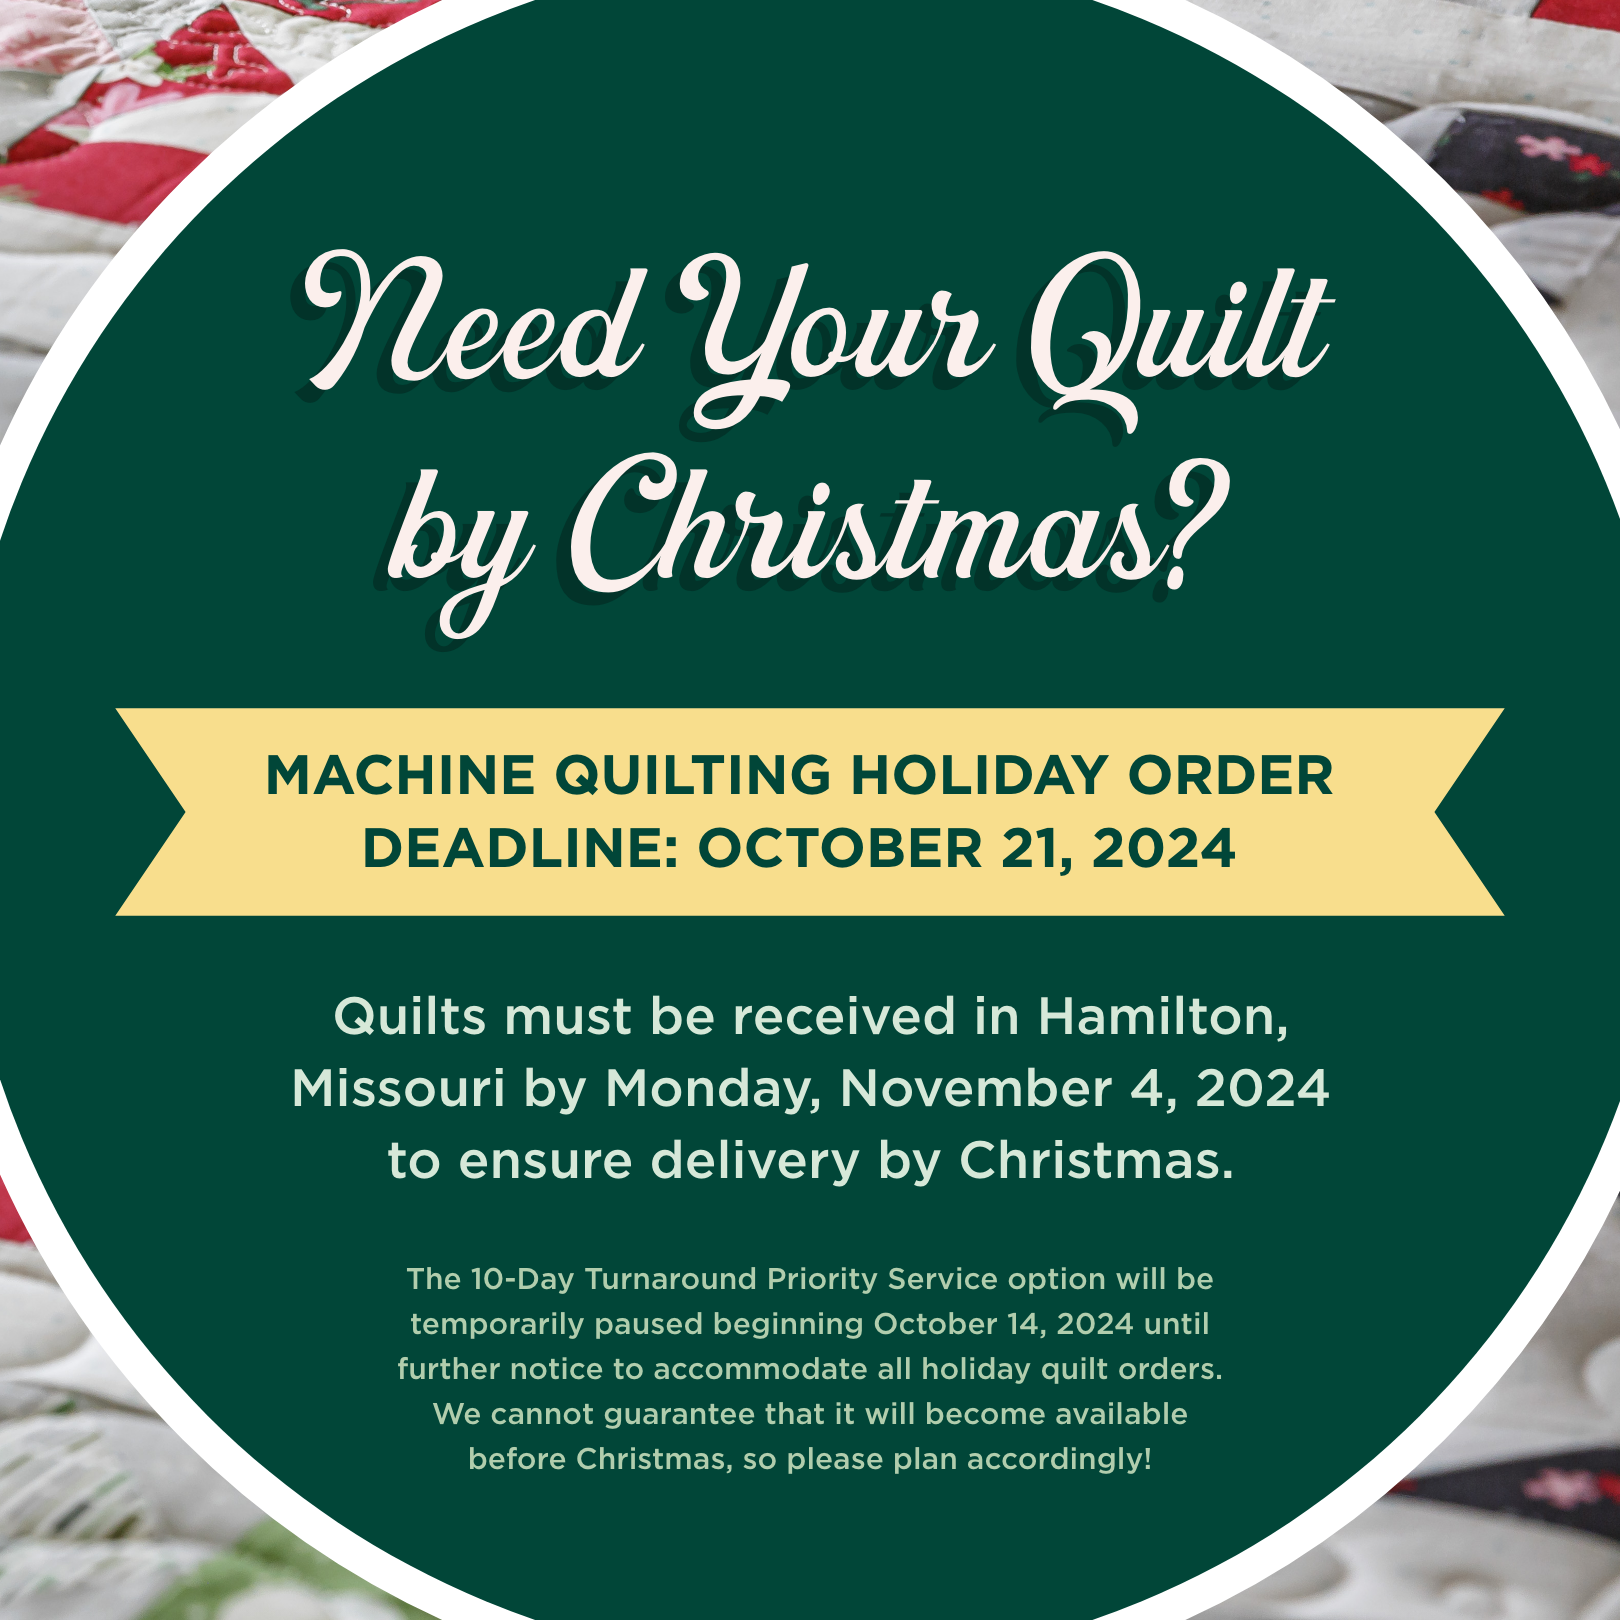 introducing faster turnaround times for longarm machine quilting services at Missouri Star! Value service quilting completed in 4 weeks or upgrade to priority for 7-day guaranteed turnaround. Please allow additional time for quilt binding, if ordered.